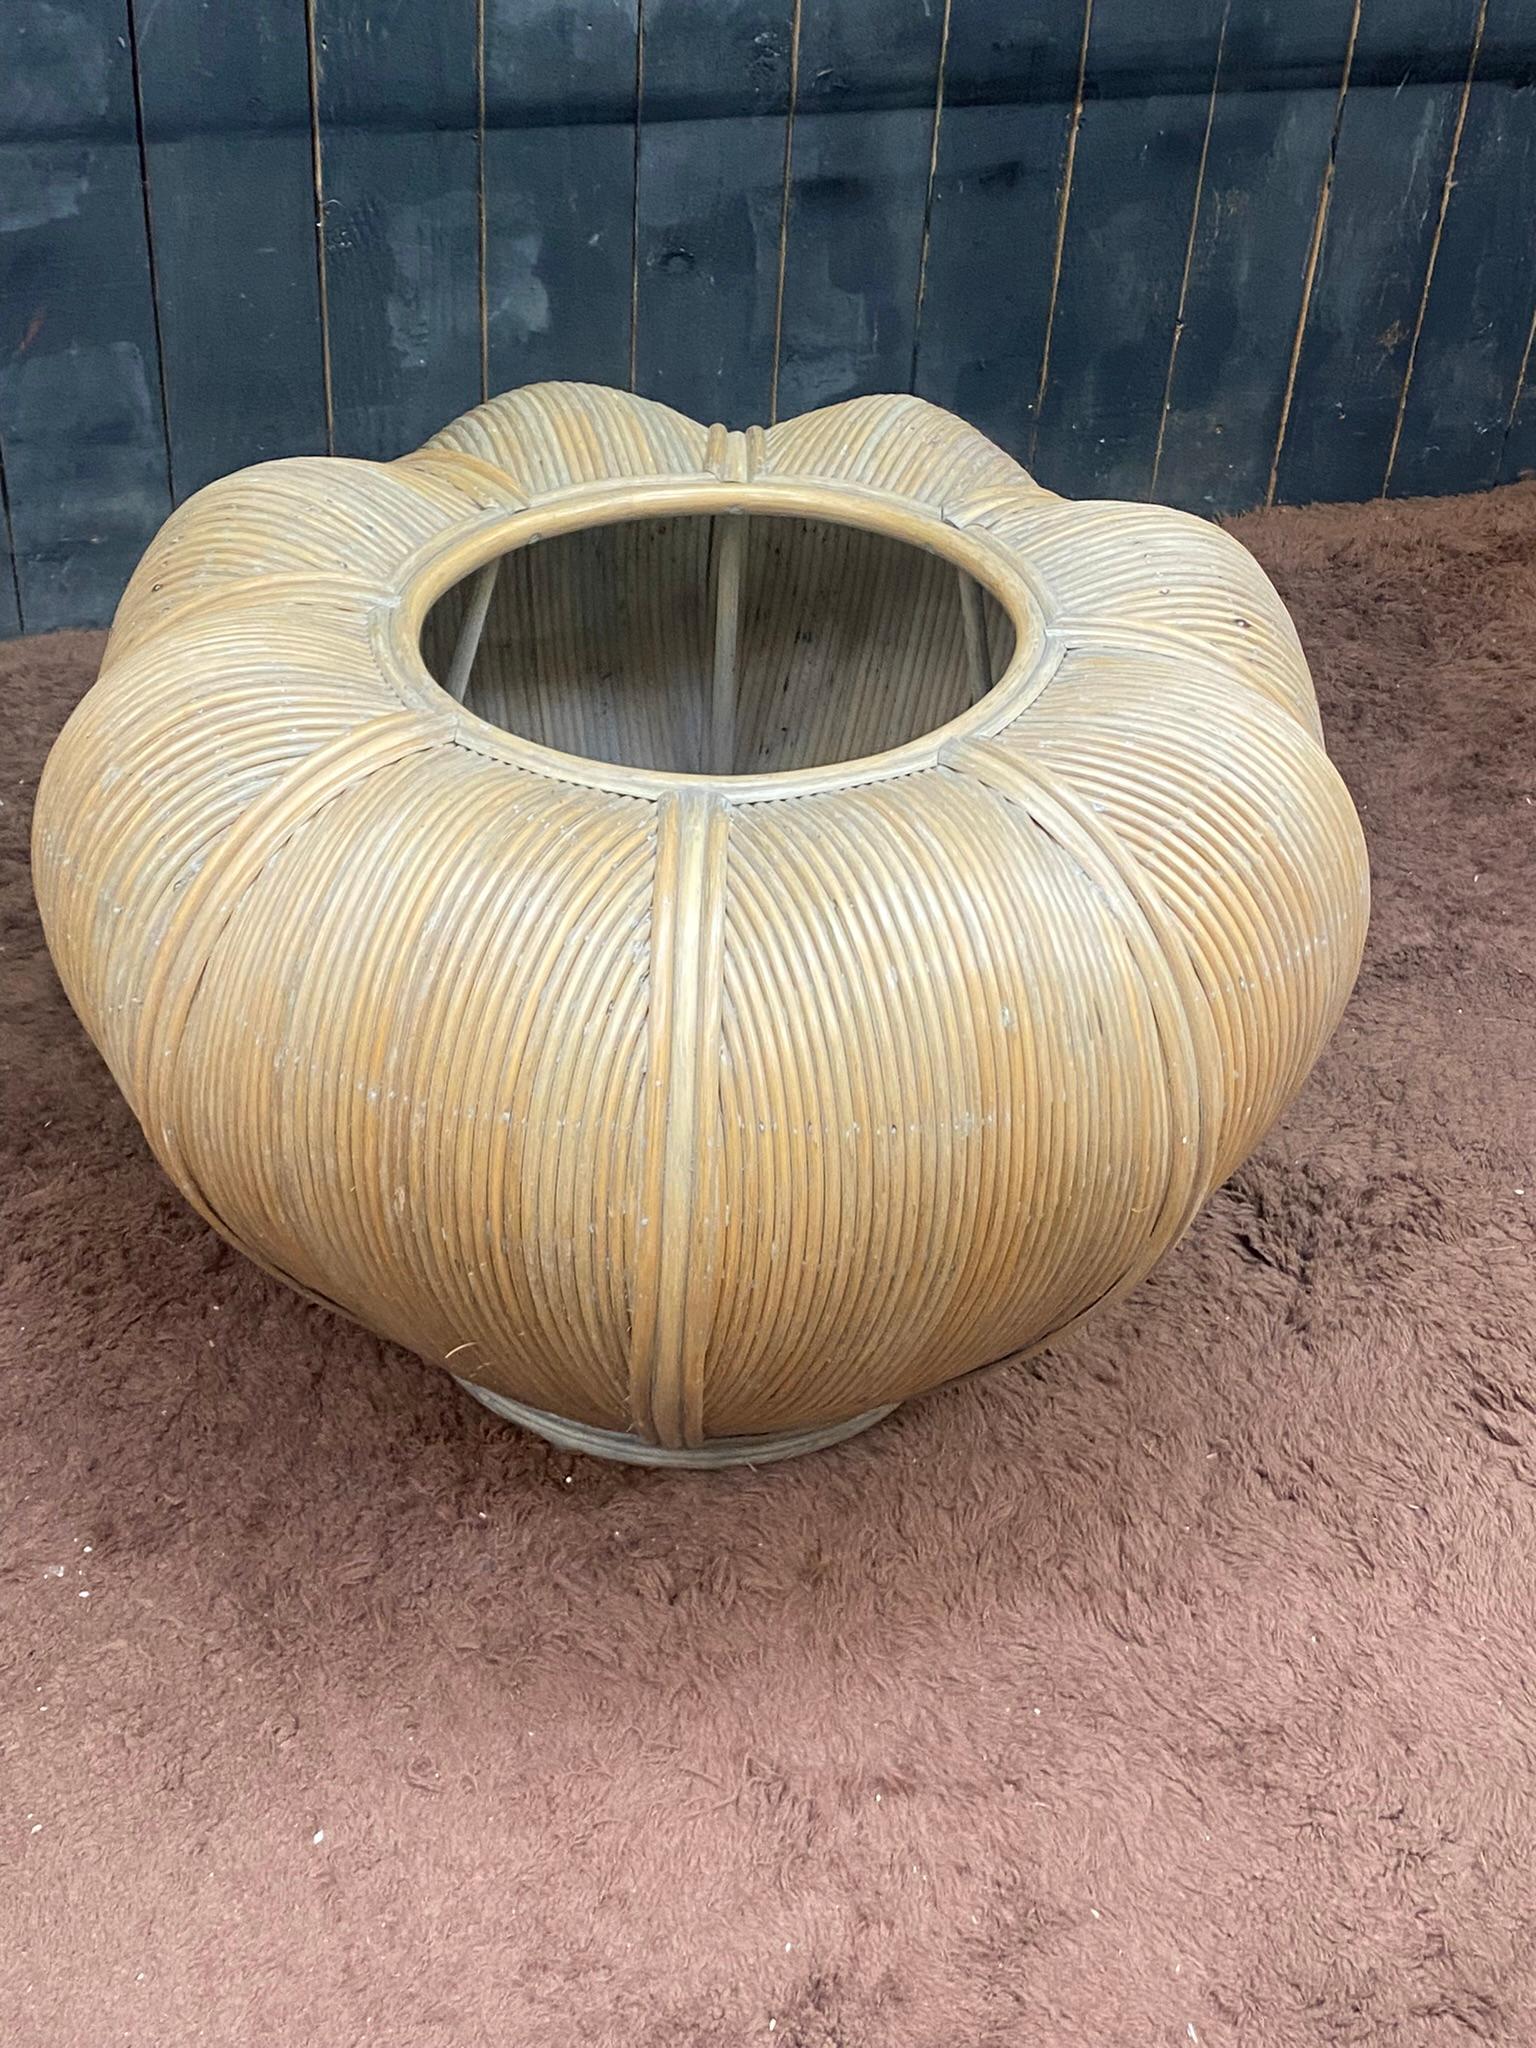 Large Bamboo and Rattan flowerpot , circa 1970
the flowerpot is tinted yellow

